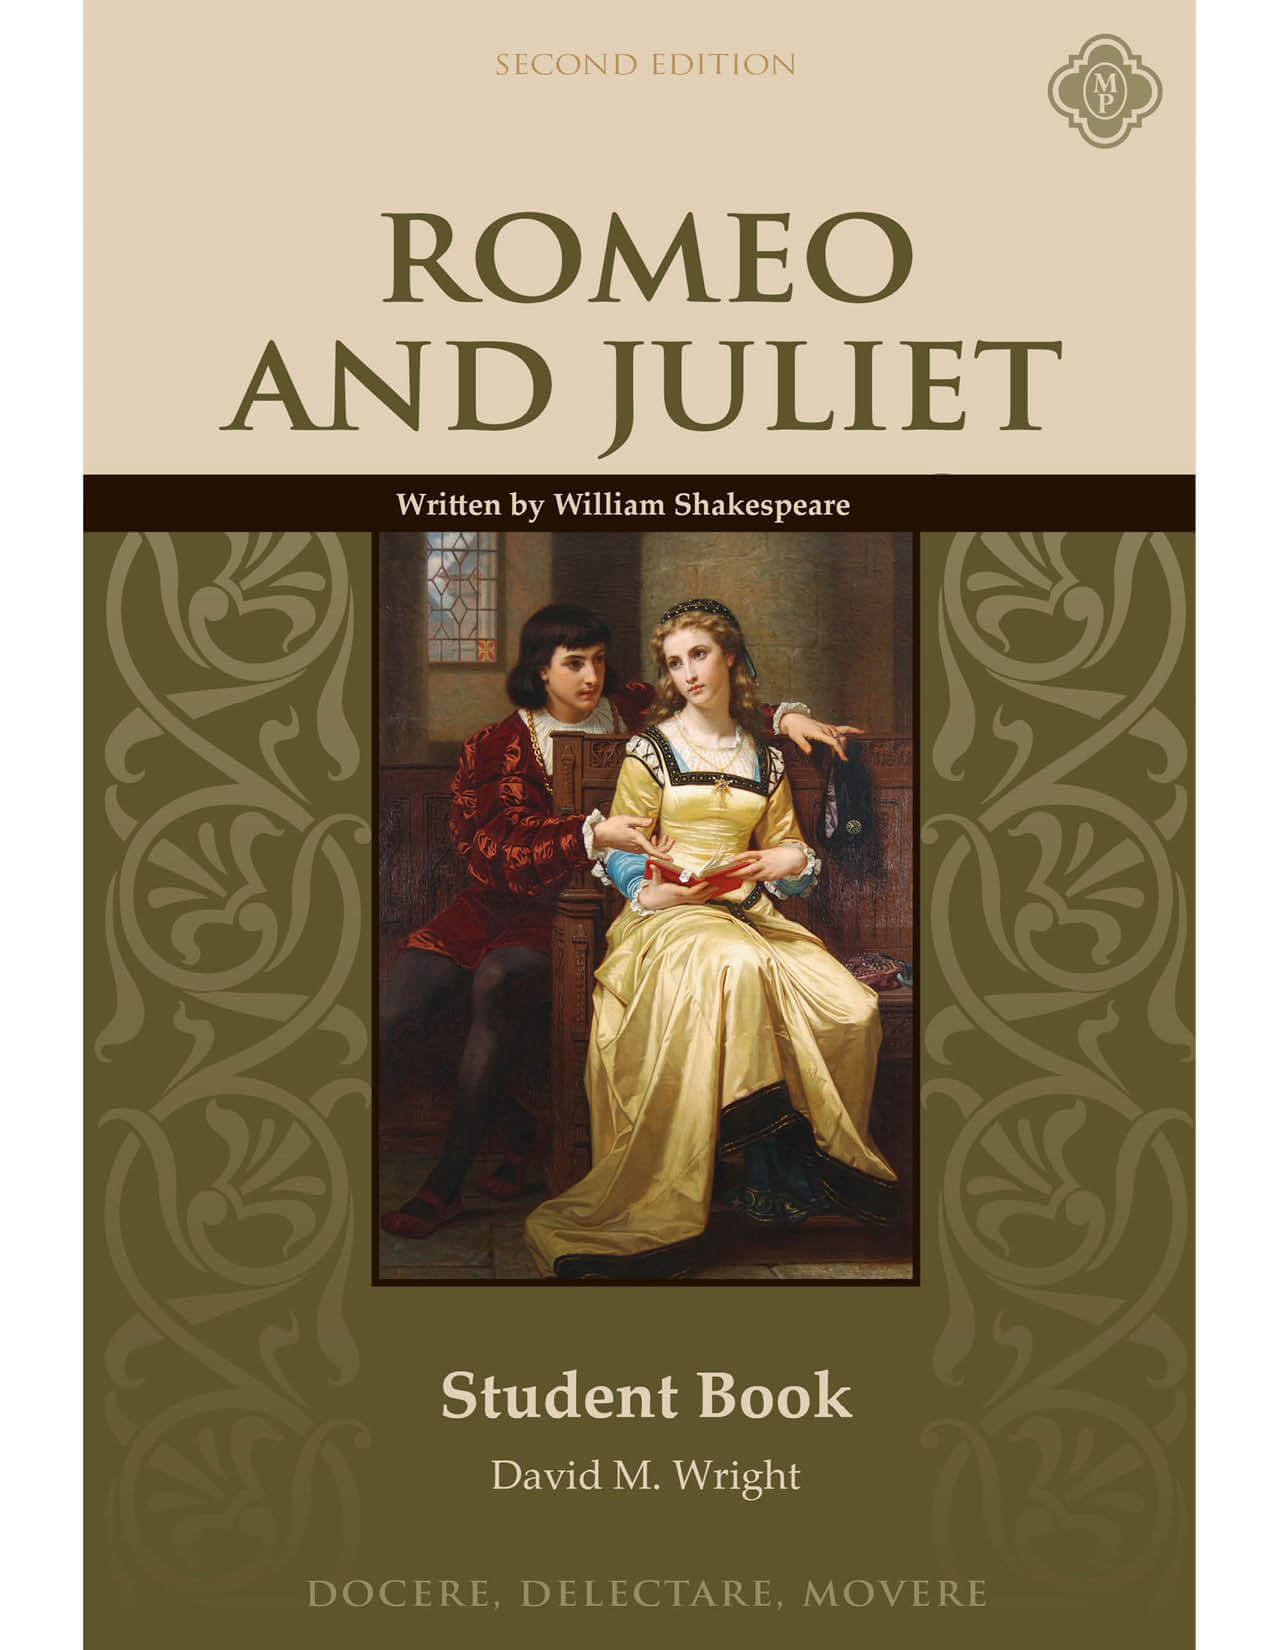 romeo and juliet book jacket